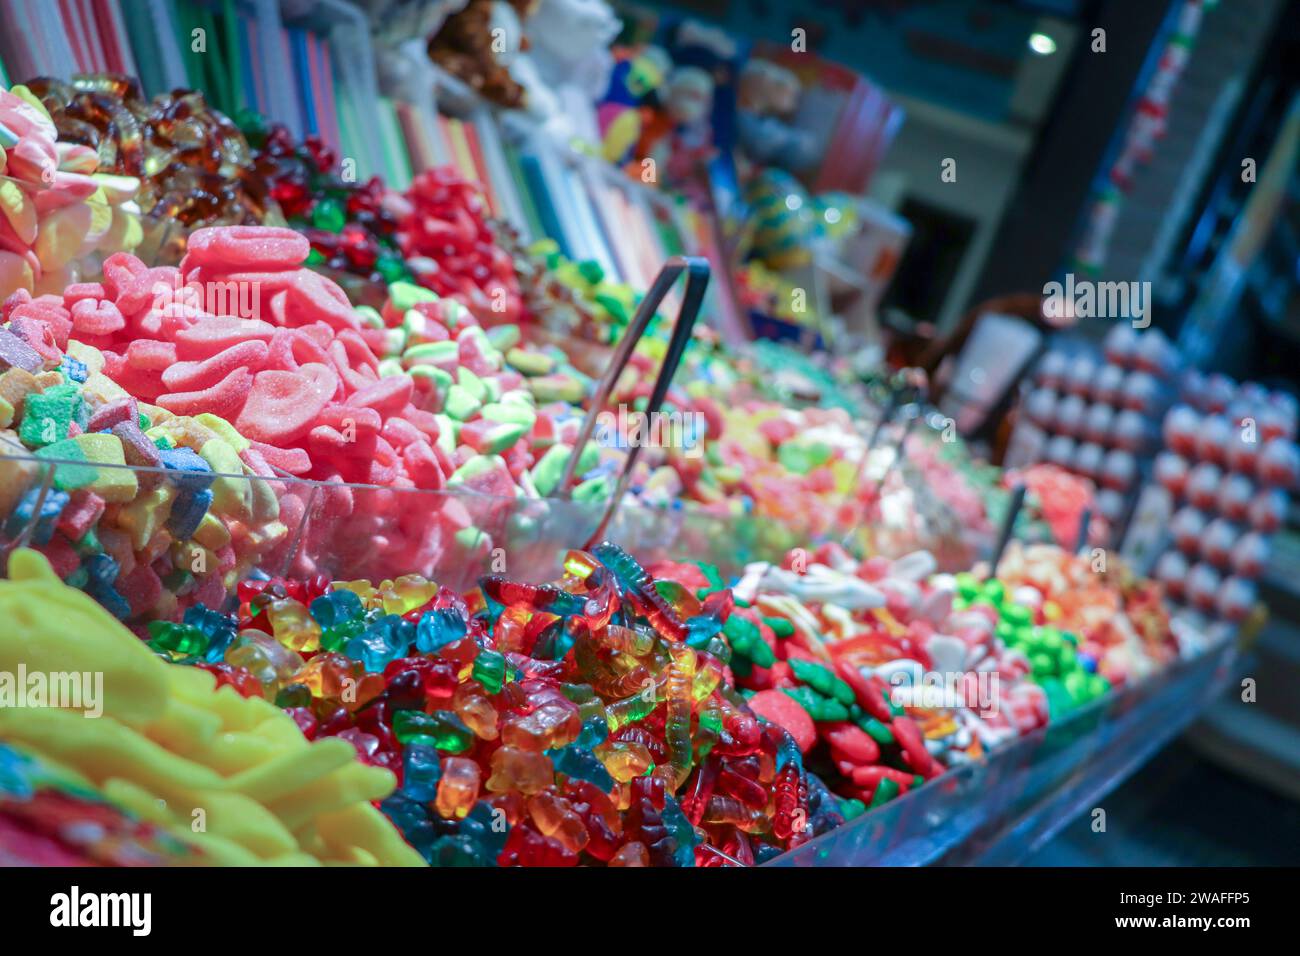 Candy stand in a candy store. Loaded with colorful candies including gummy bears. Focused photography Stock Photo